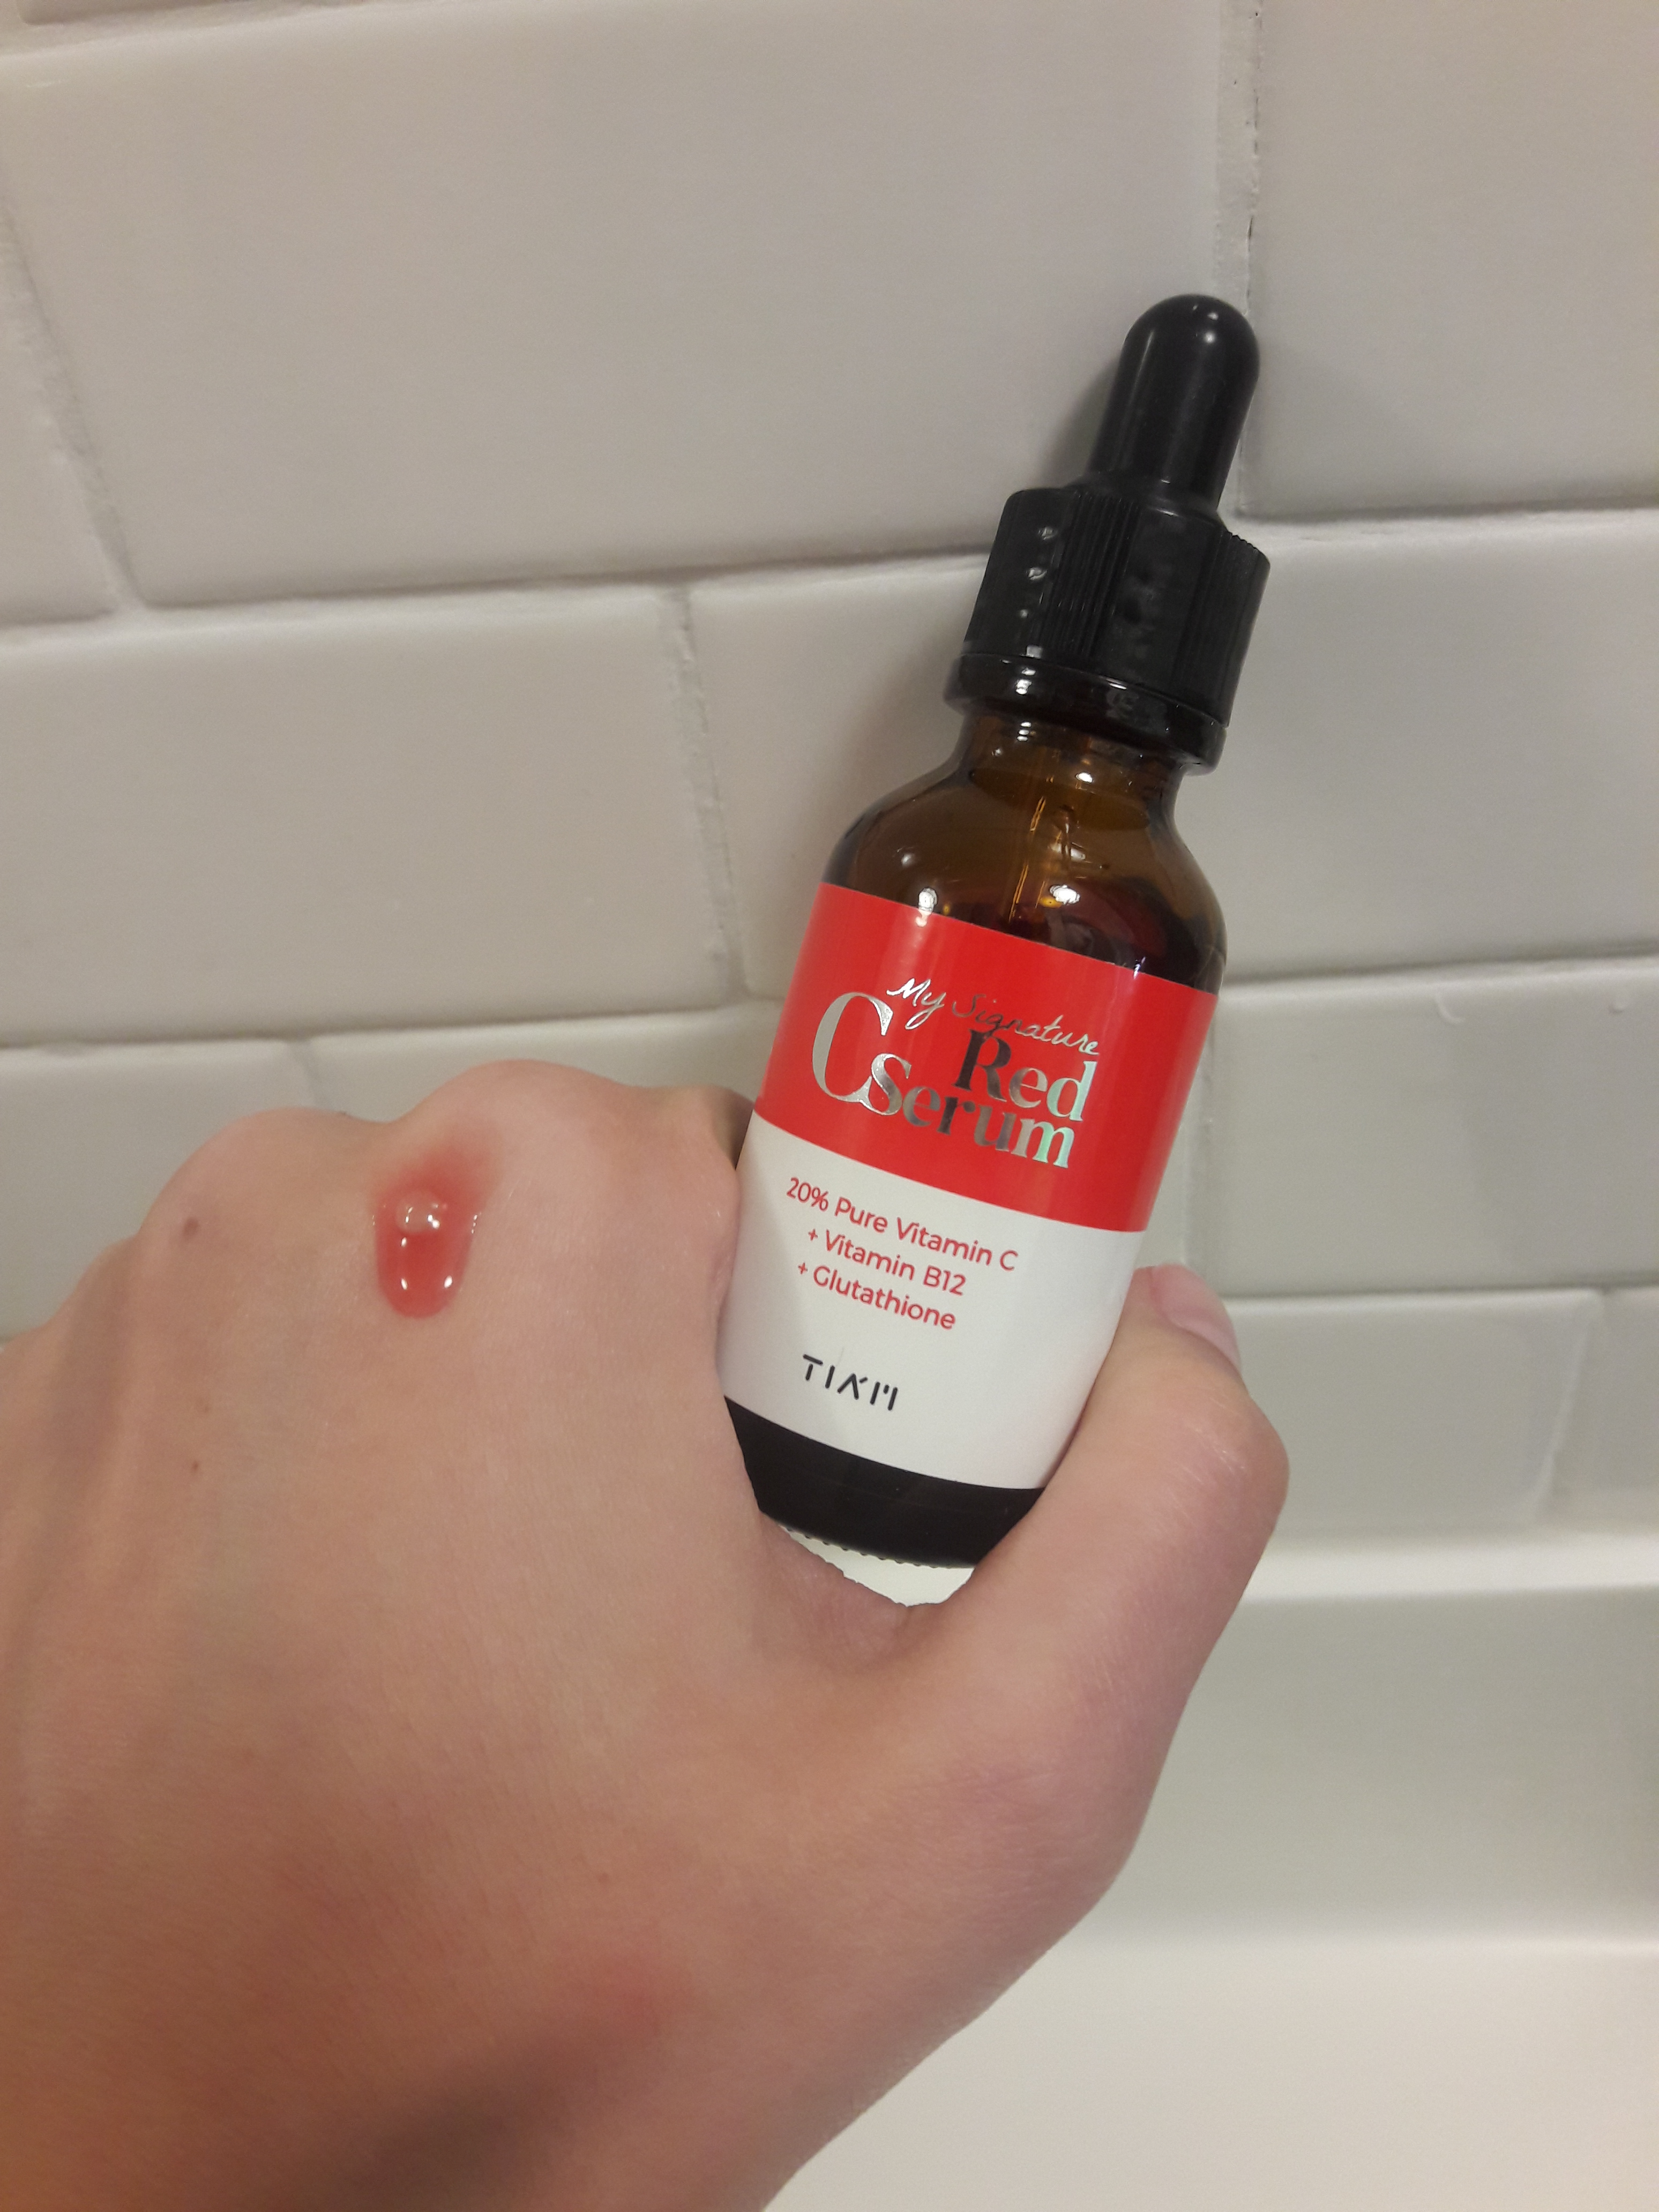 TIAM My Signature Red C Serum: A New Favorite! Your Kbeauty Addict